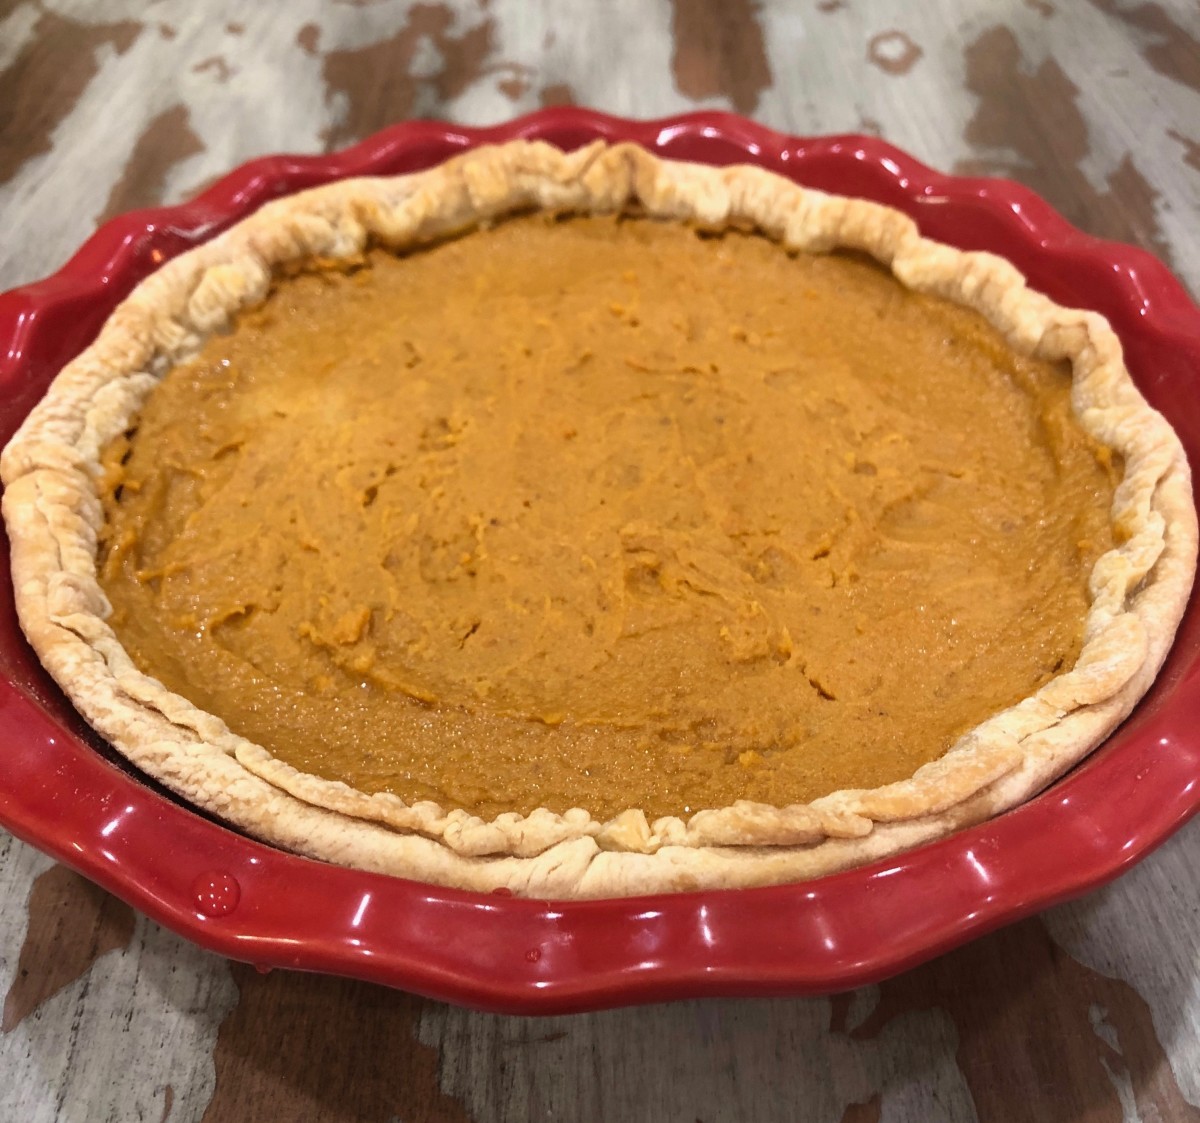 We couldn't wait to try this, my first attempt at making a sweet potato pie. It was delicious, if I do say so myself.